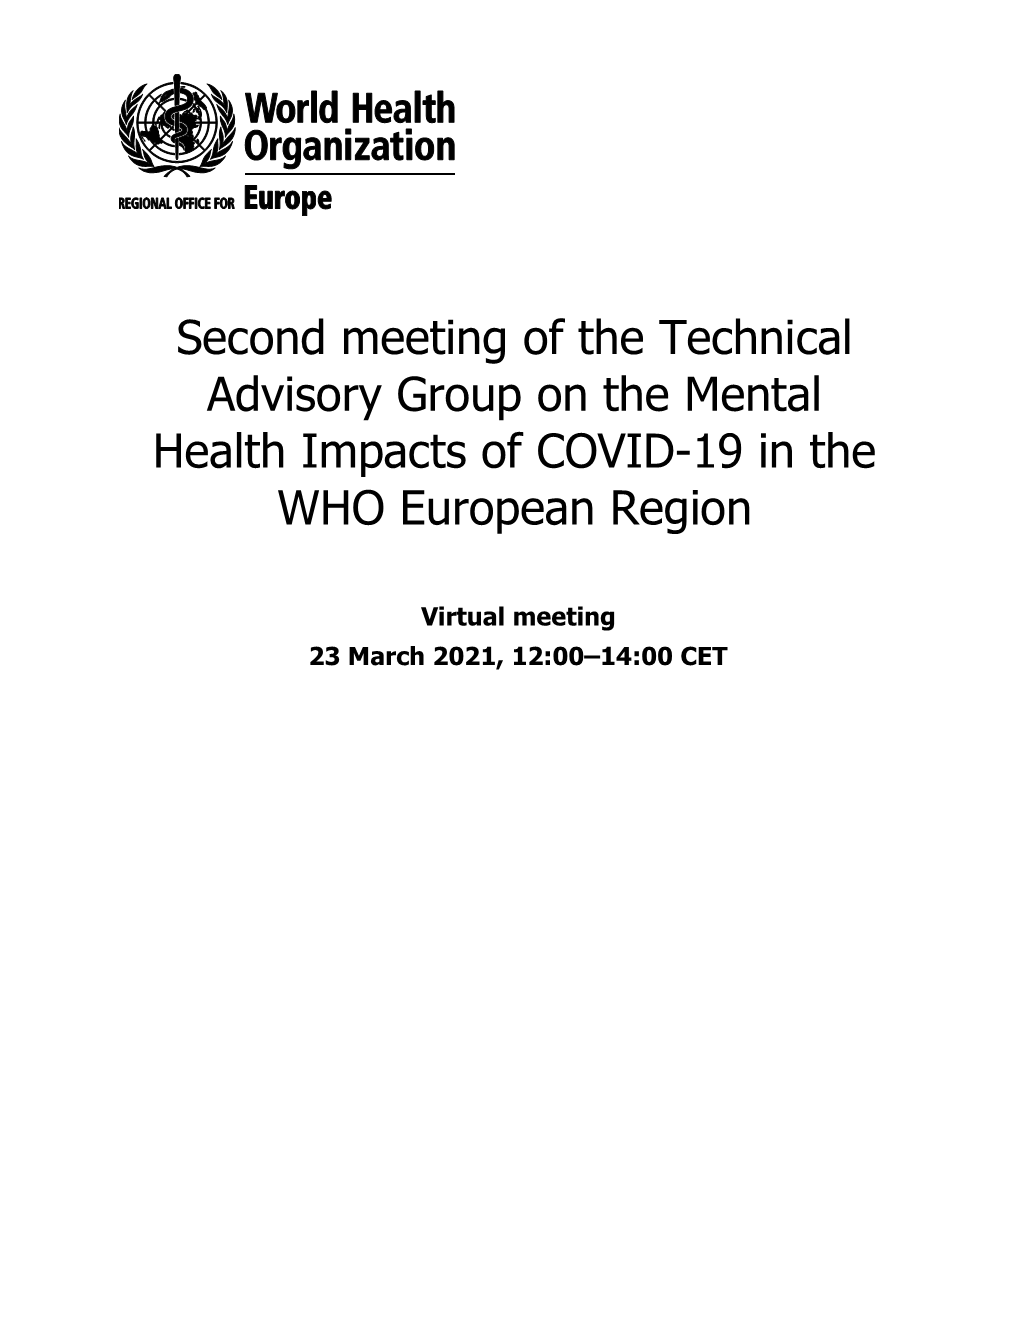 Second Meeting of the Technical Advisory Group on the Mental Health Impacts of COVID-19 in the WHO European Region